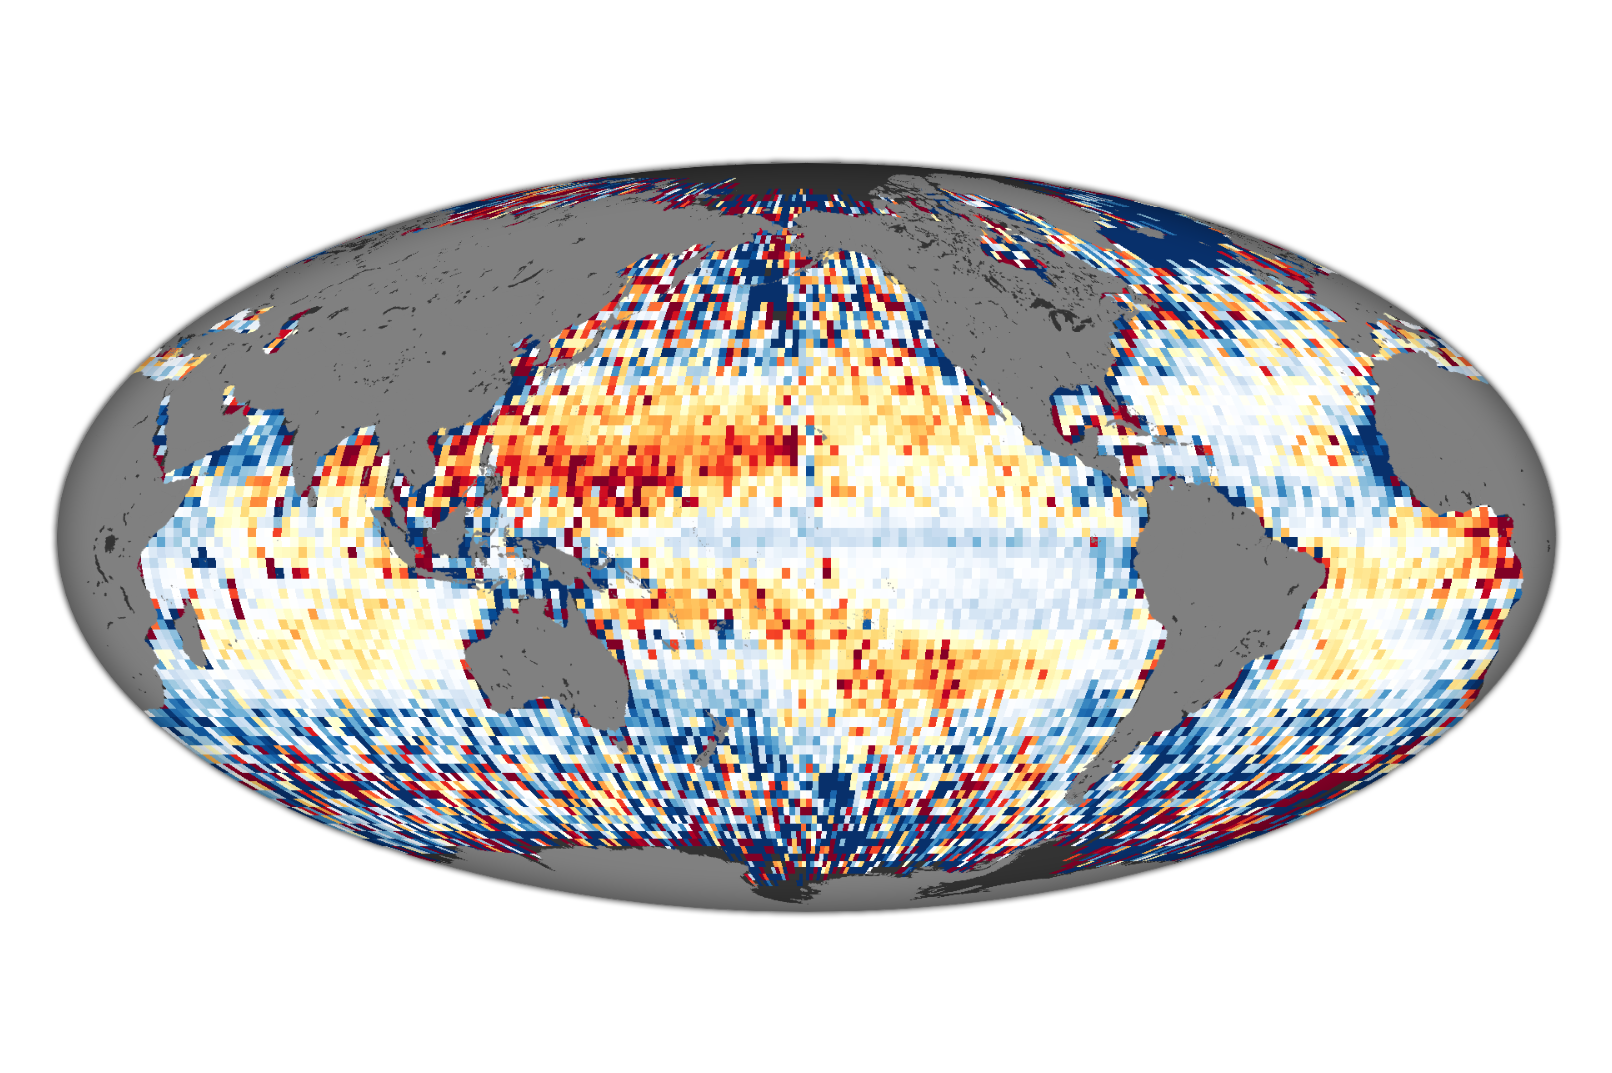 Satellite Observes Massive Ocean Migration - related image preview